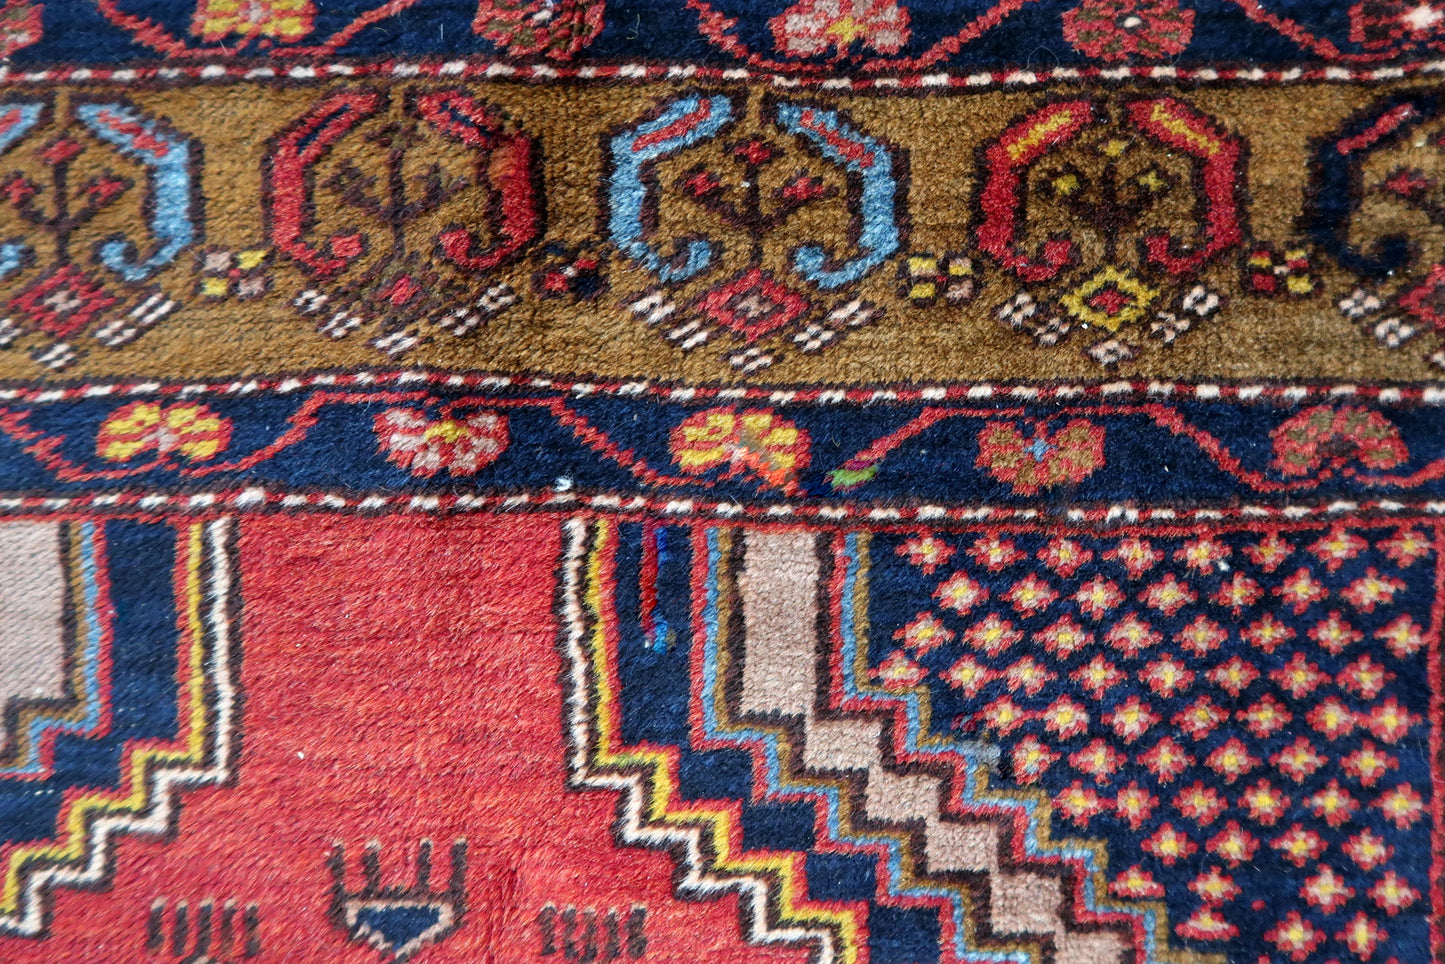 Side angle view of the rug, highlighting its thickness and plush texture